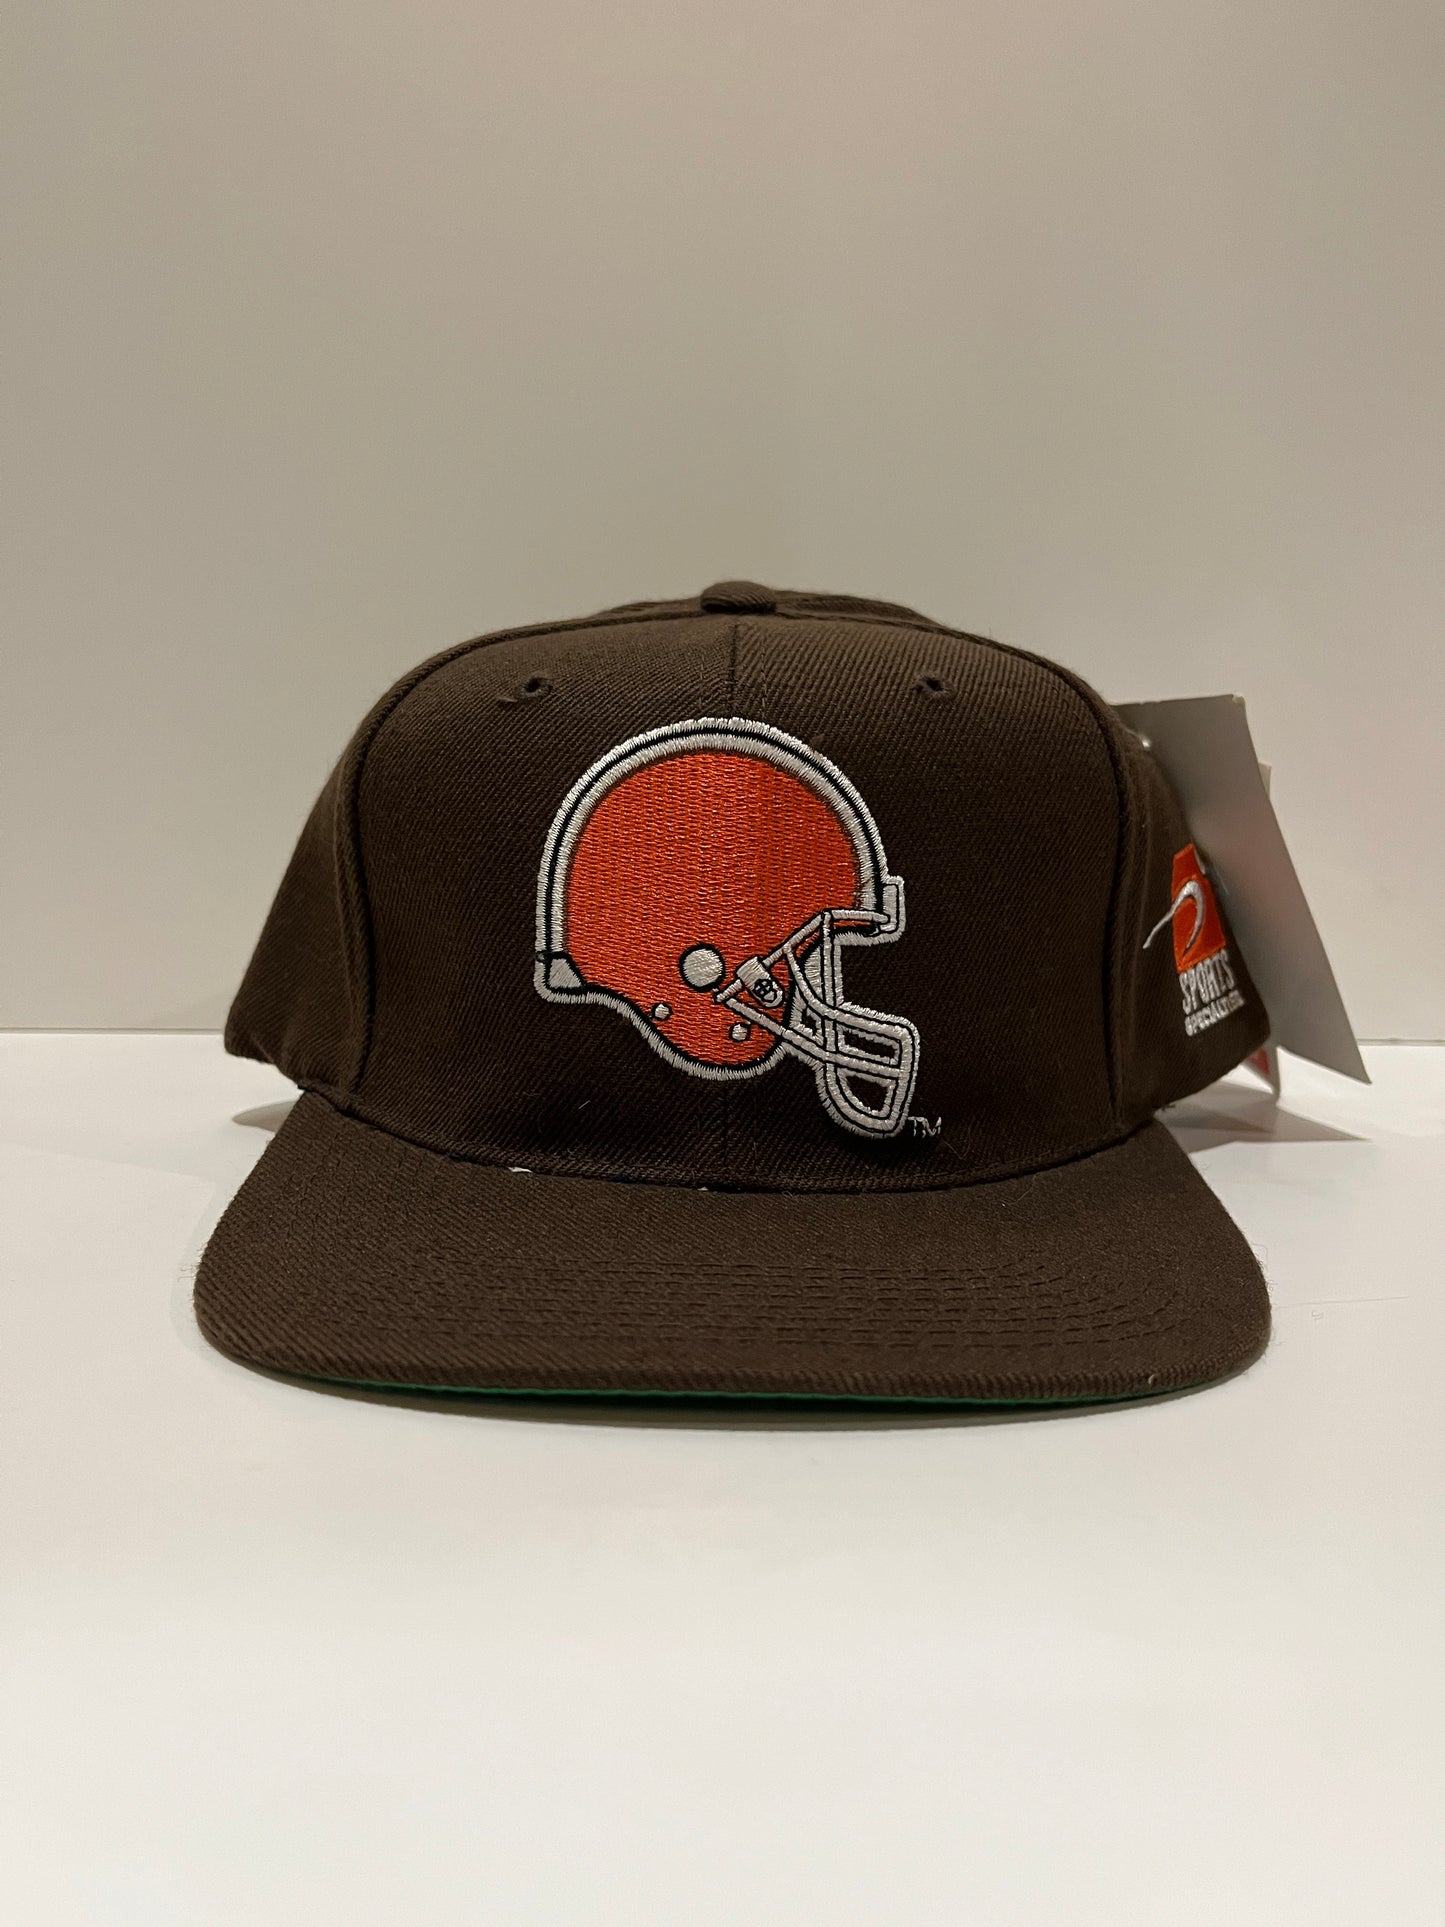 Vintage Sports Specialties Cleveland Browns Snapback Hat